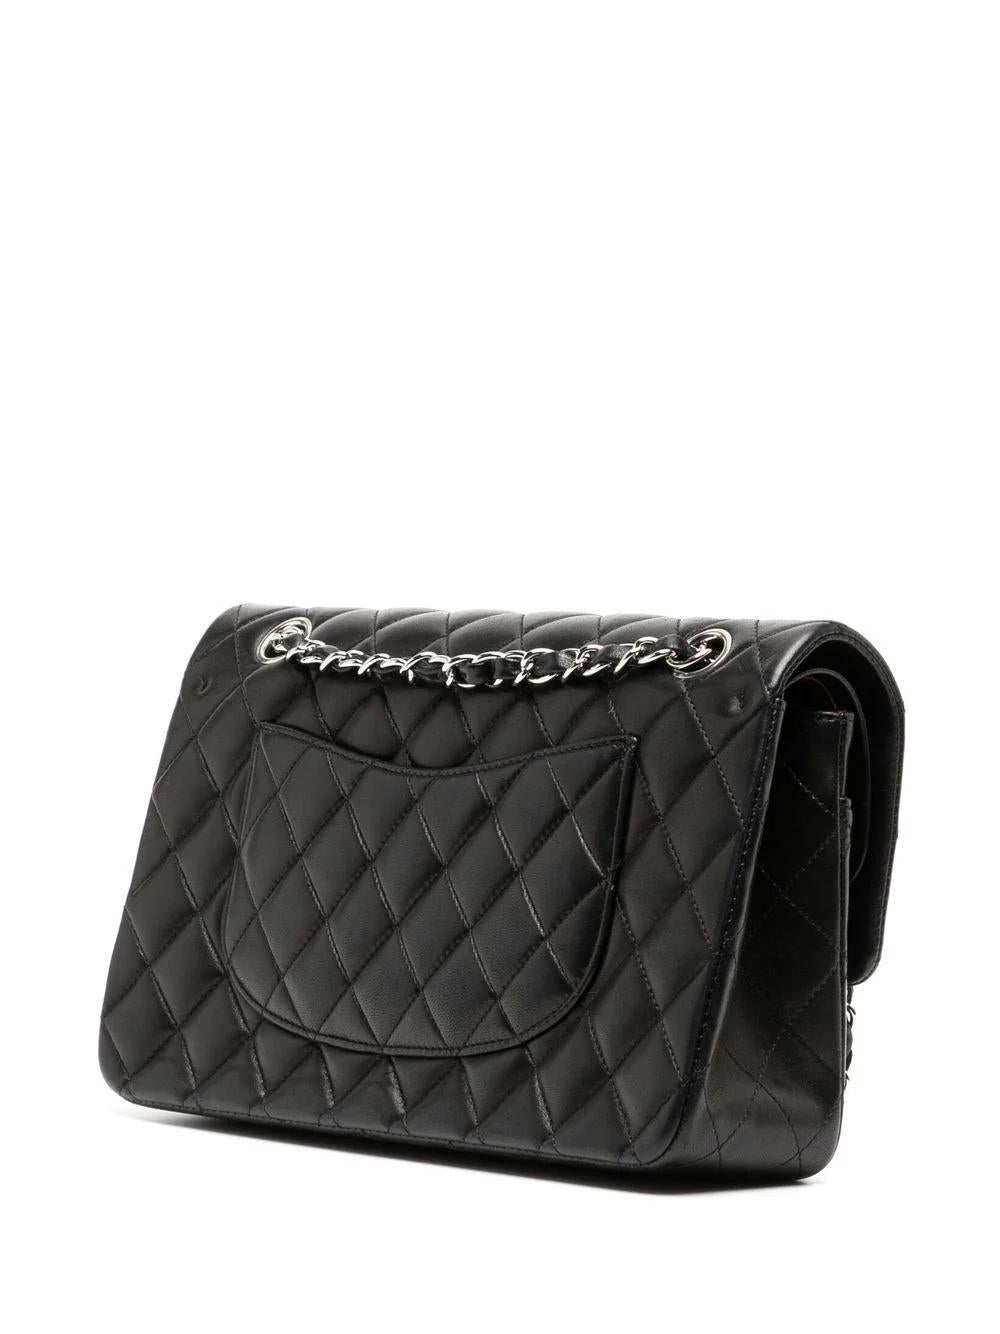 Chanel 2006 Vintage 2.55 Quilted Lambskin Medium Classic Double Flap Bag  For Sale 1